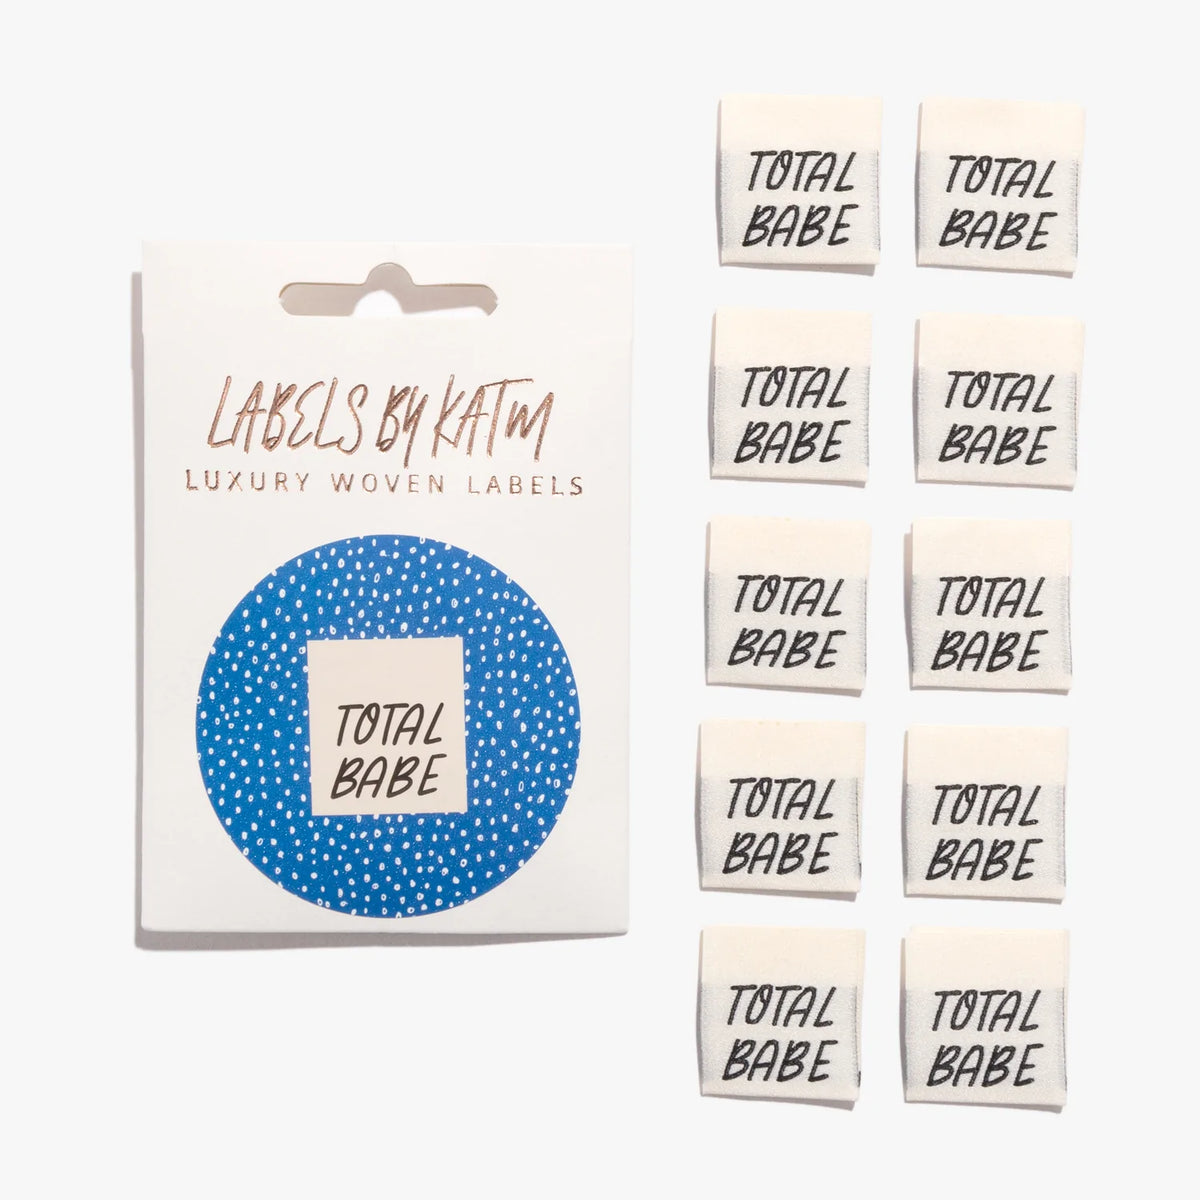 TOTAL BABE by KATM - Pack of 10 Woven Labels